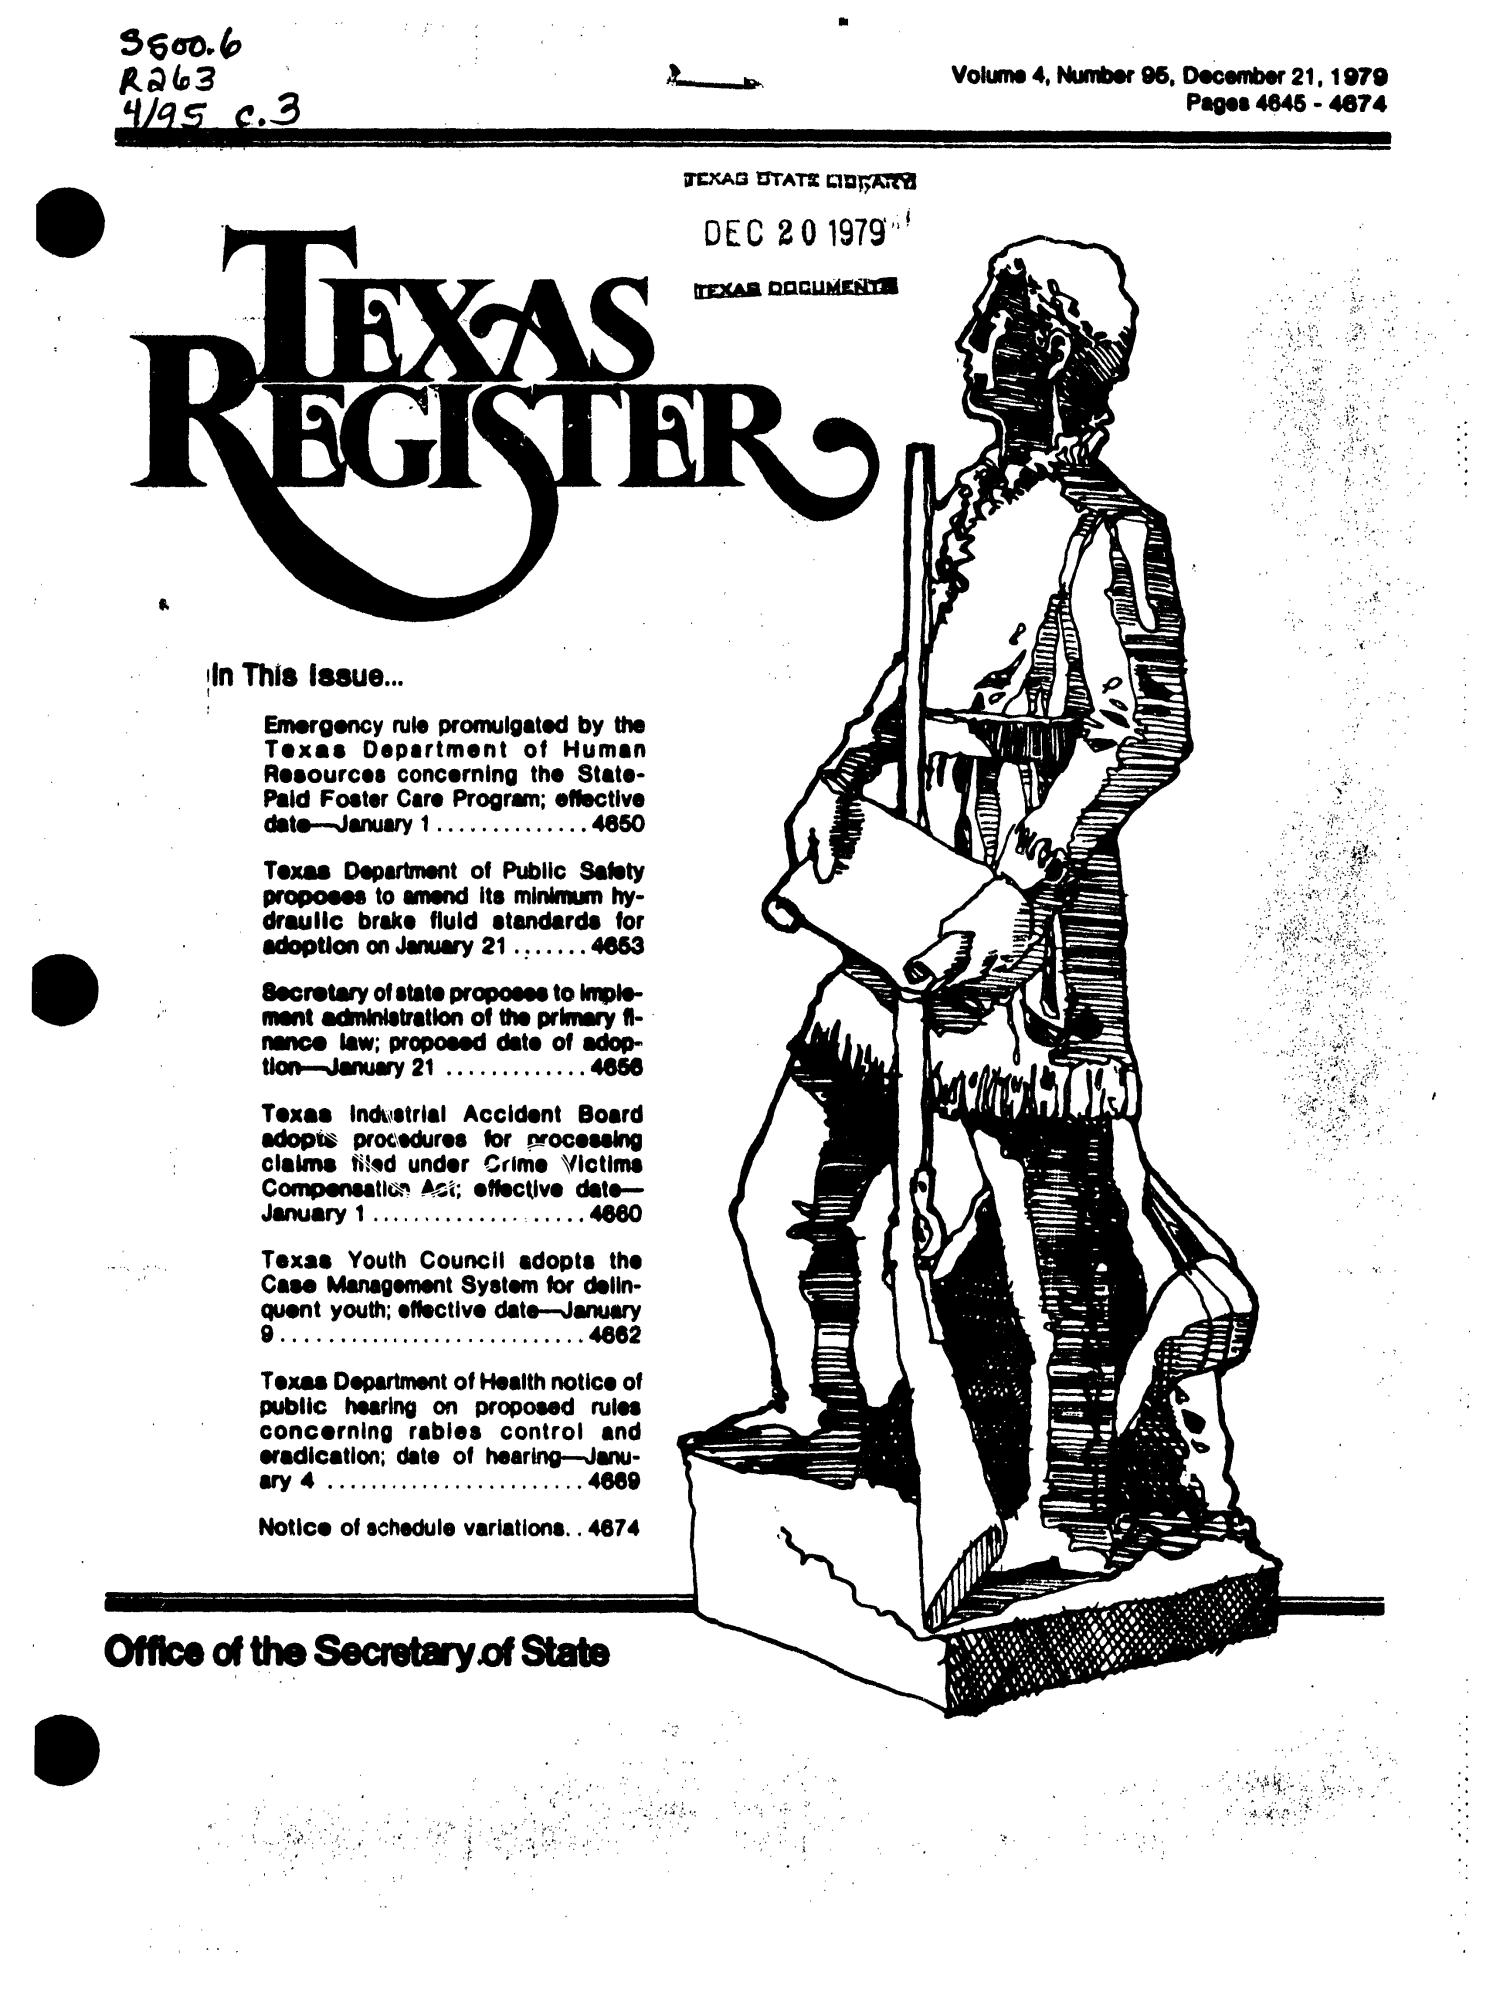 Texas Register, Volume 4, Number 95, Pages 4845-4874, December 21, 1979
                                                
                                                    Title Page
                                                